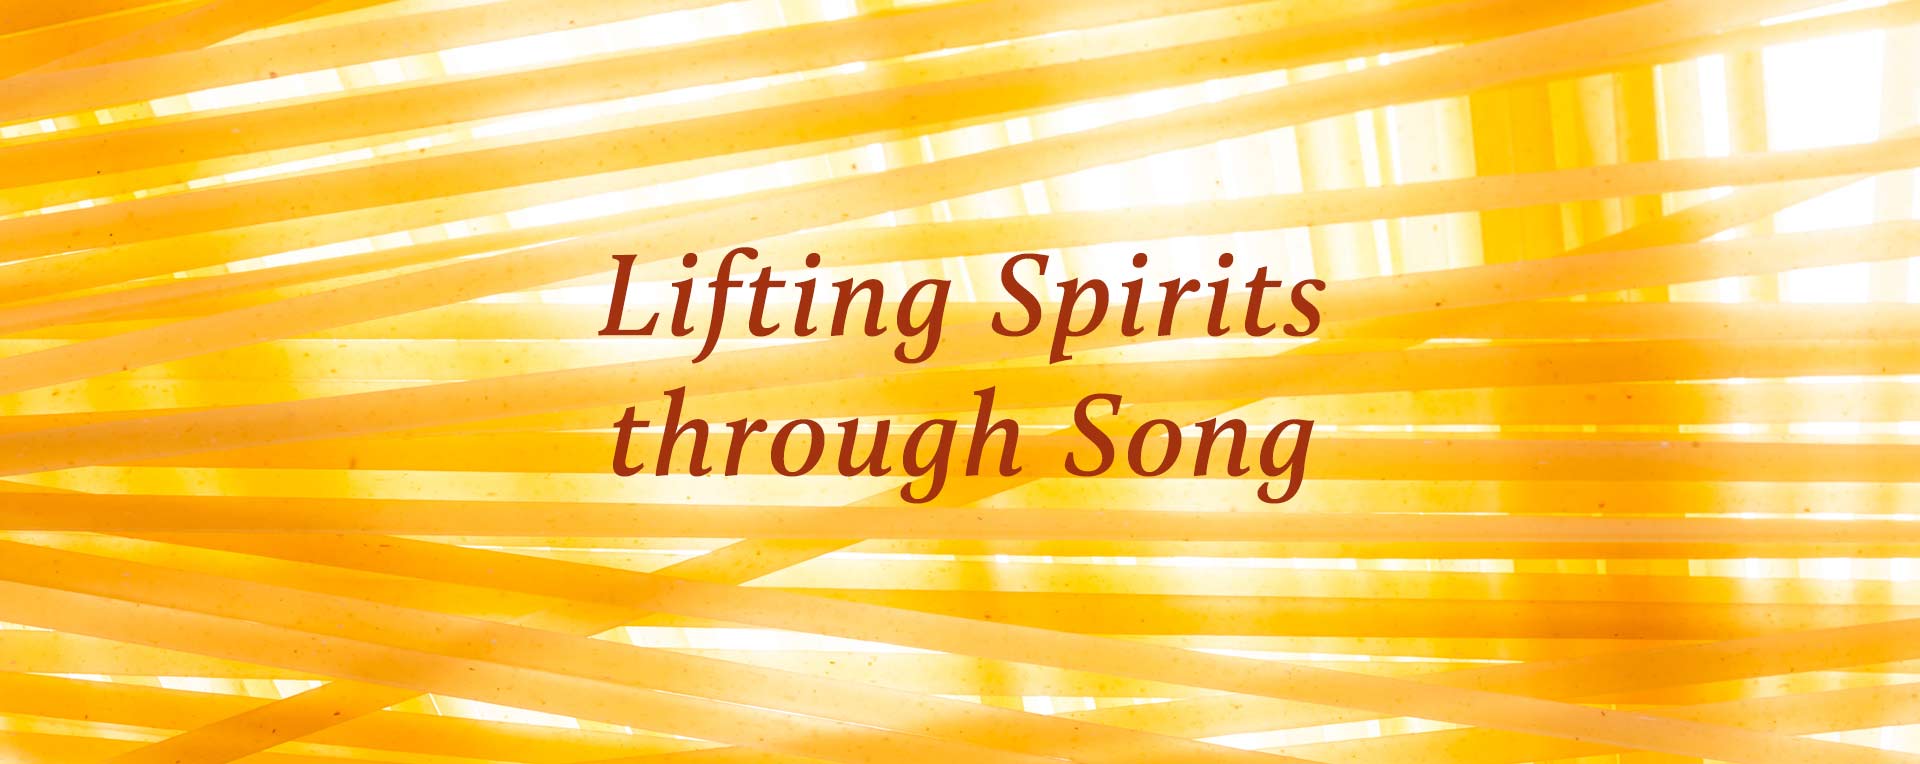 Lifting Spirit through Song printed in red with yellow striped background